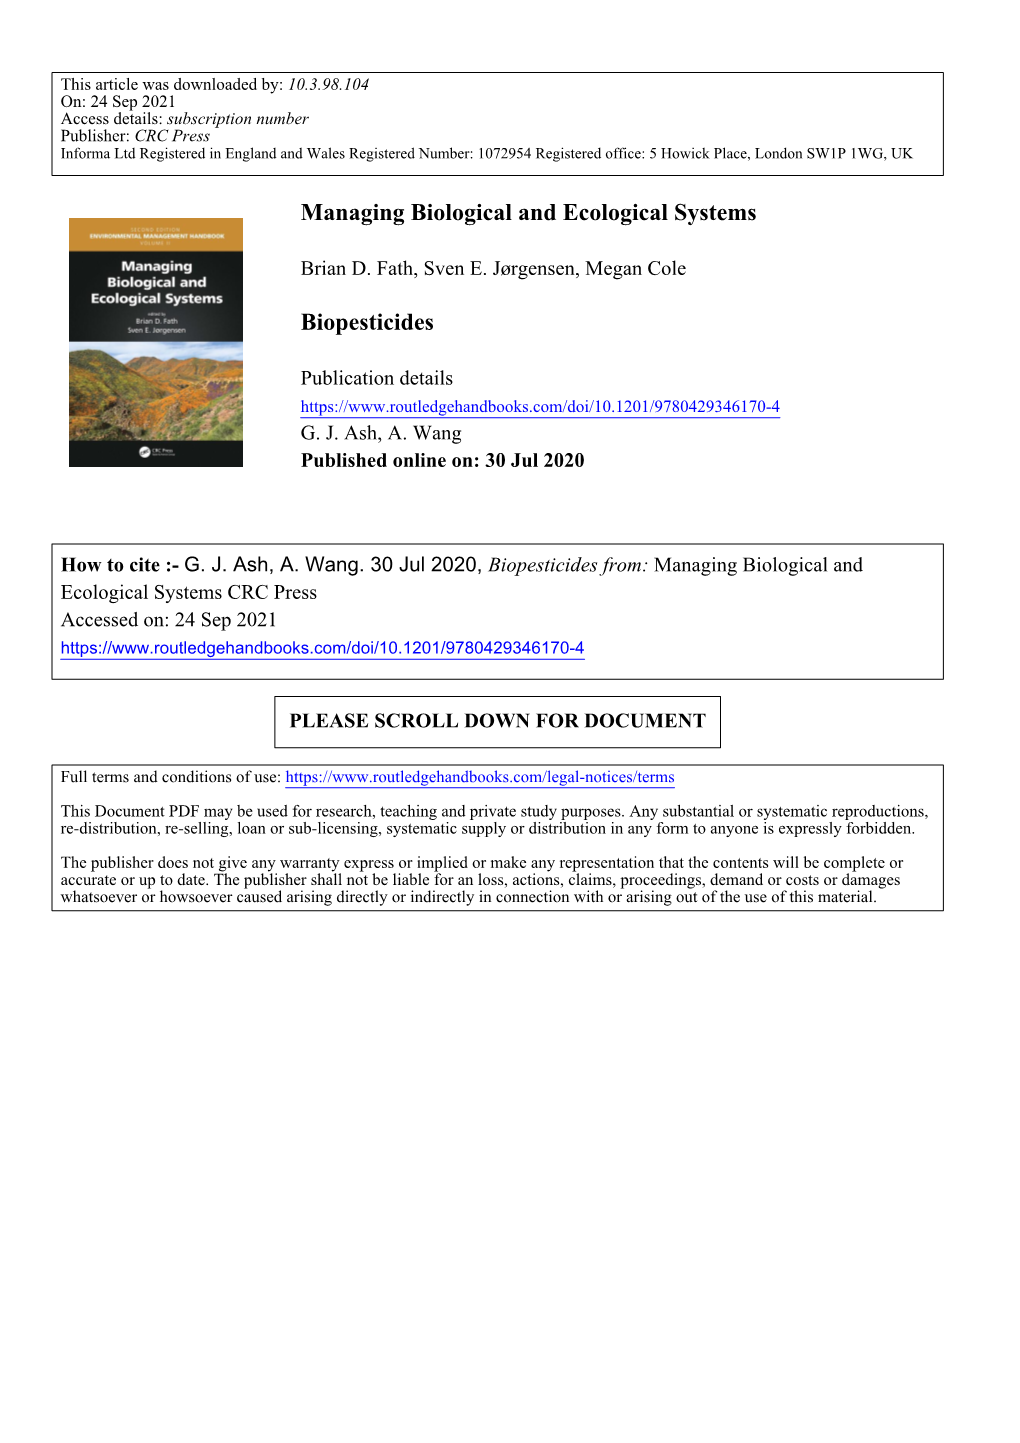 Managing Biological and Ecological Systems Biopesticides